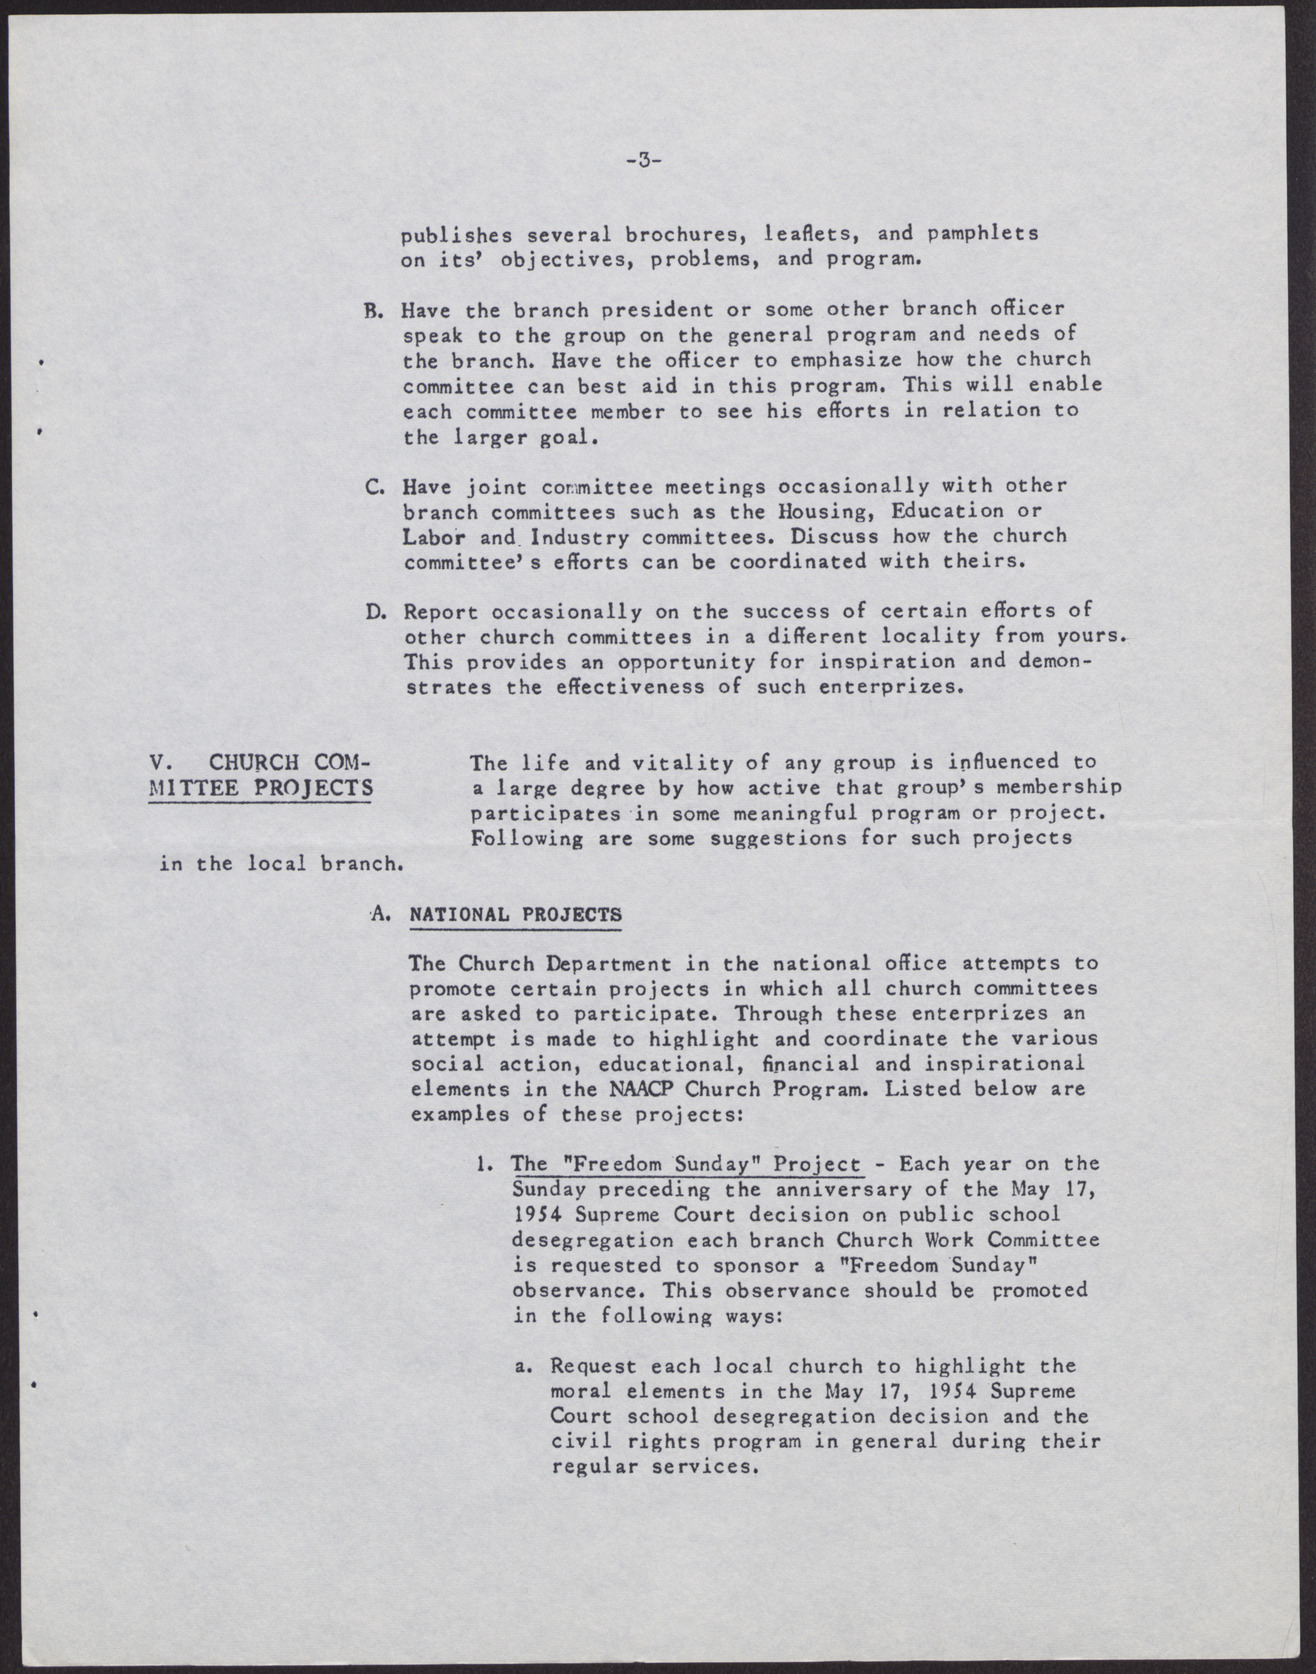 Program Suggestions for Branch Church Committees of the National Association for the Advancement of Colored People (9 pages), no date, page 6